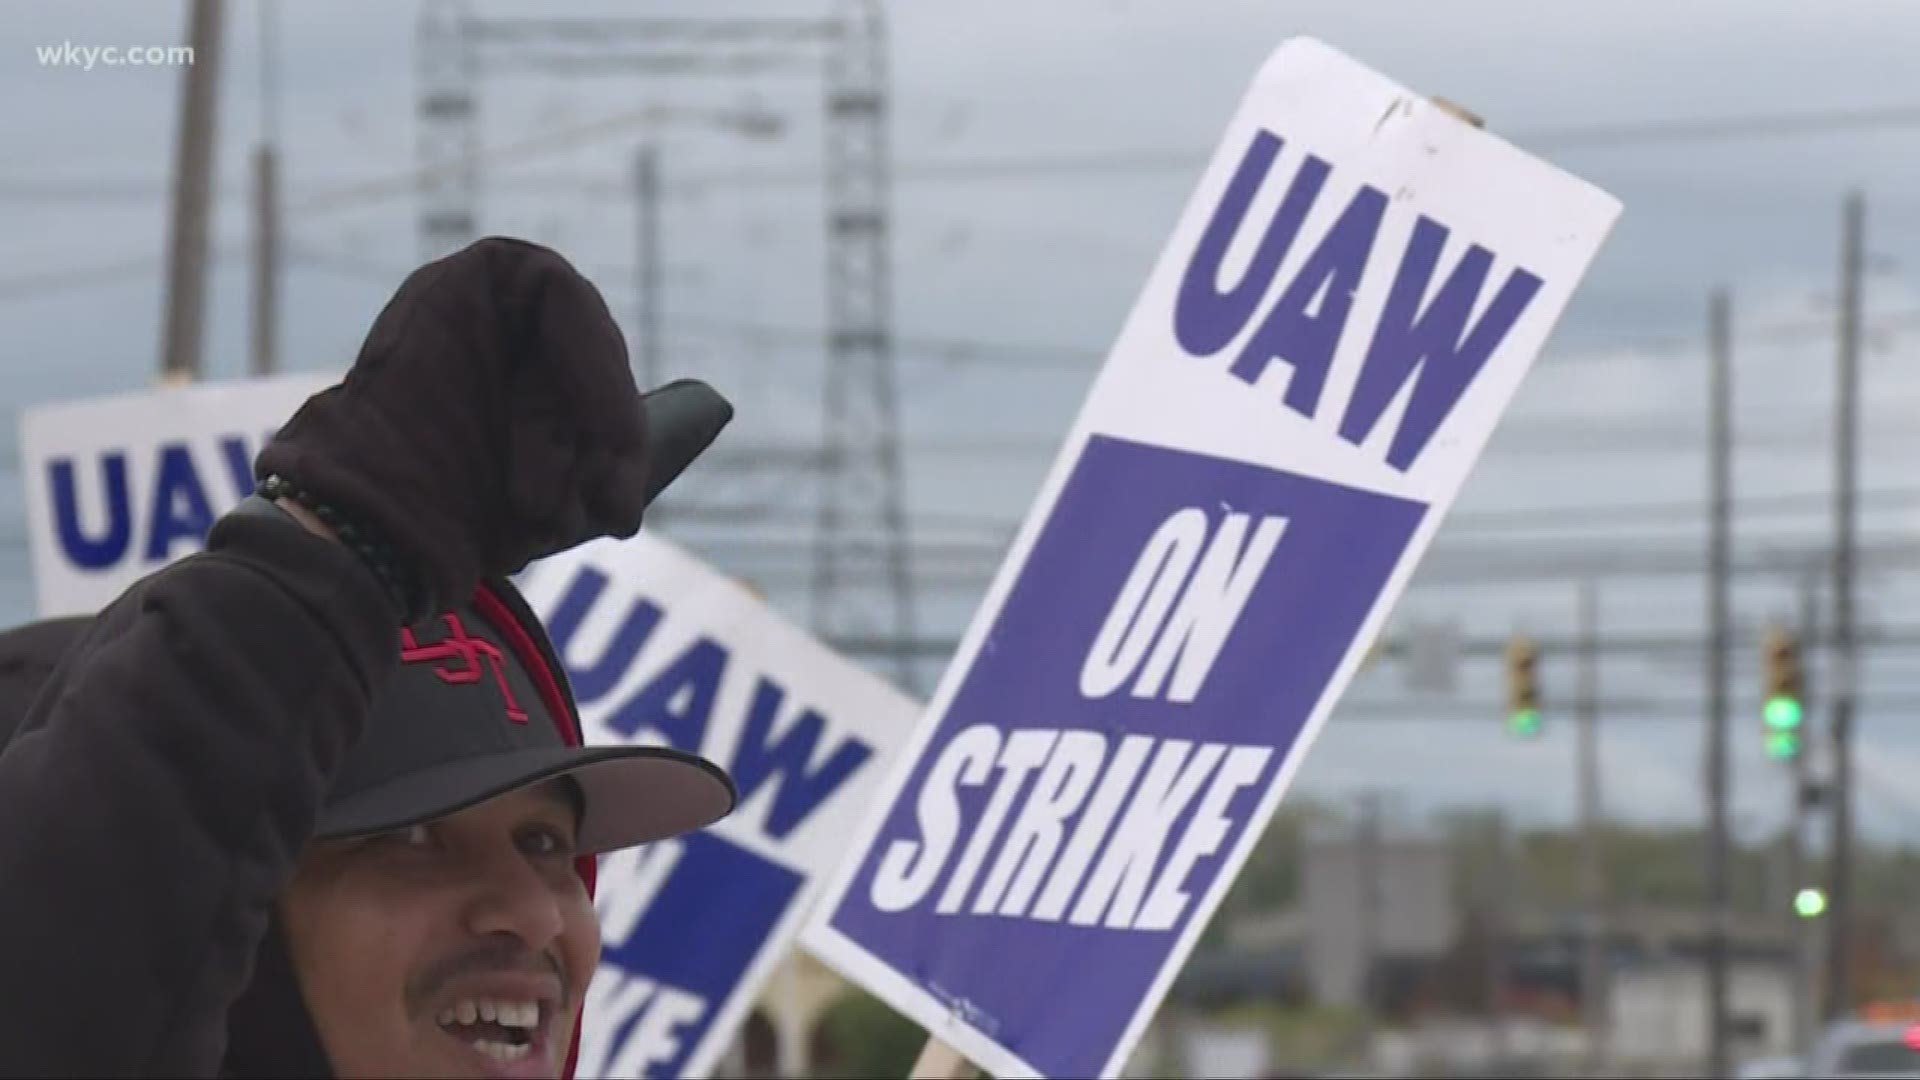 Oct. 23, 2019: Workers for General Motors have been on strike for more than six weeks now, but it could soon come to an end as union members vote on the new deal.